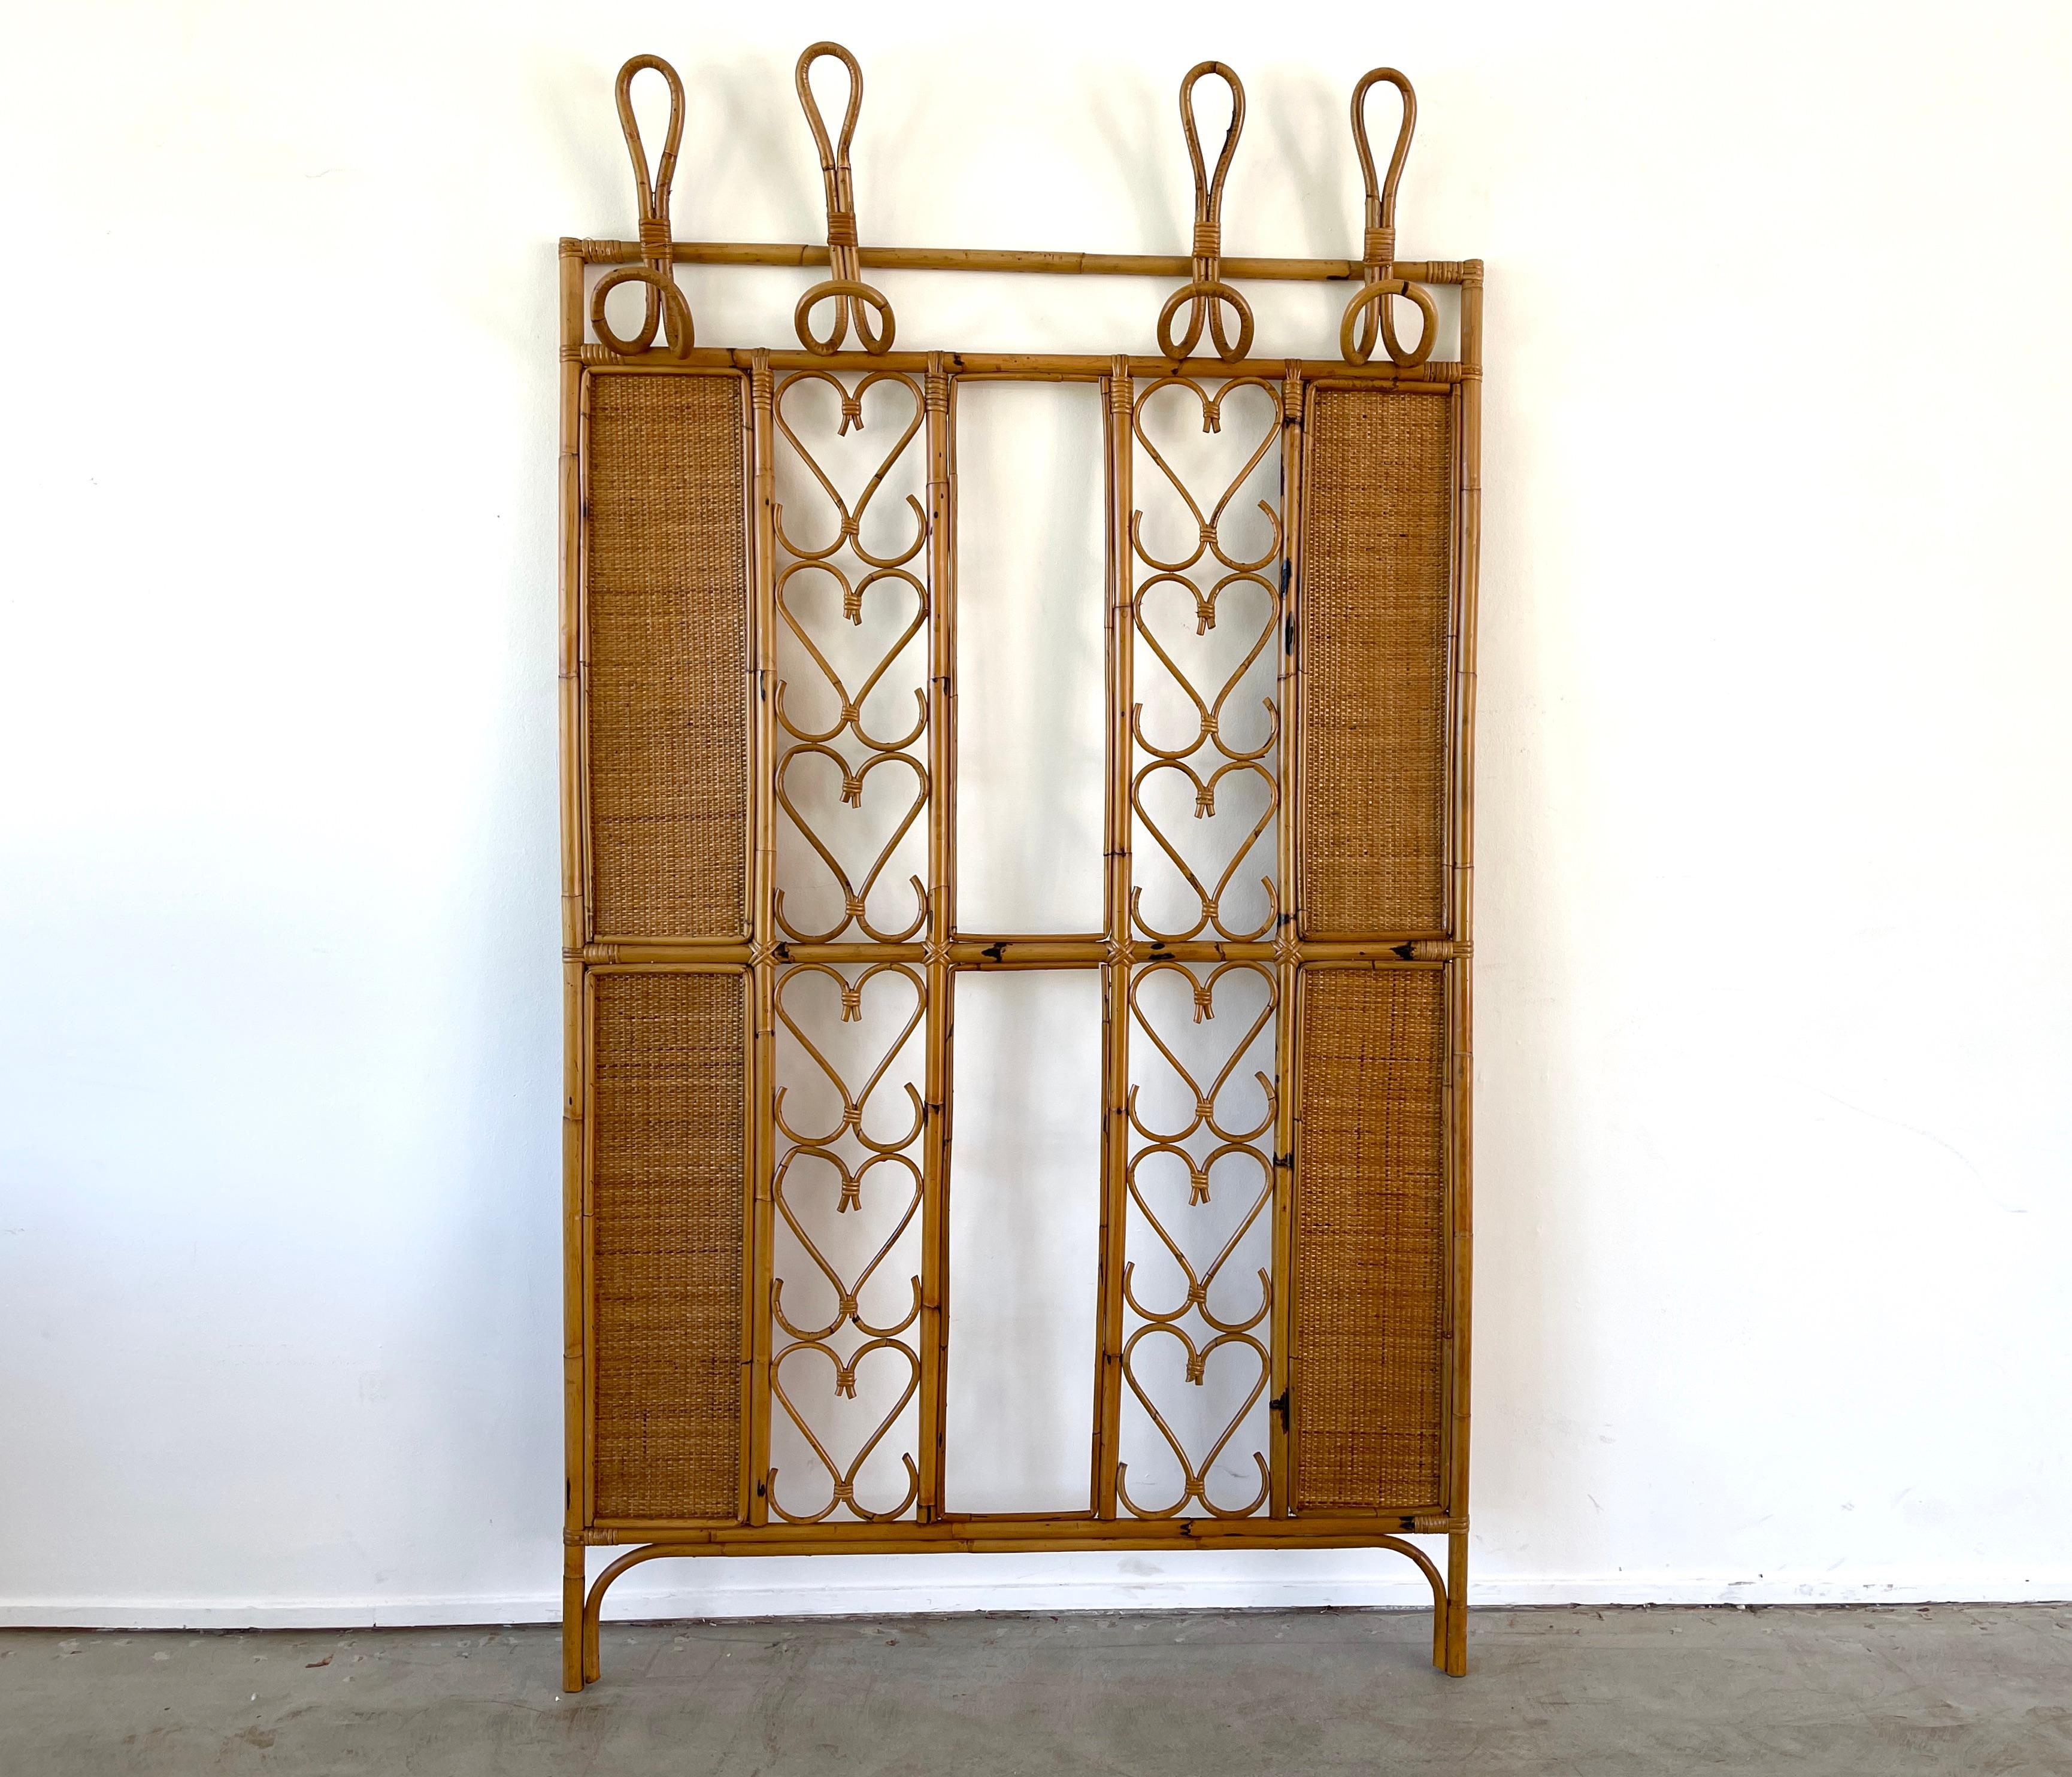 Unique bamboo and wicker Italian wall rack with heart shaped design 
Features 4 double hooks.